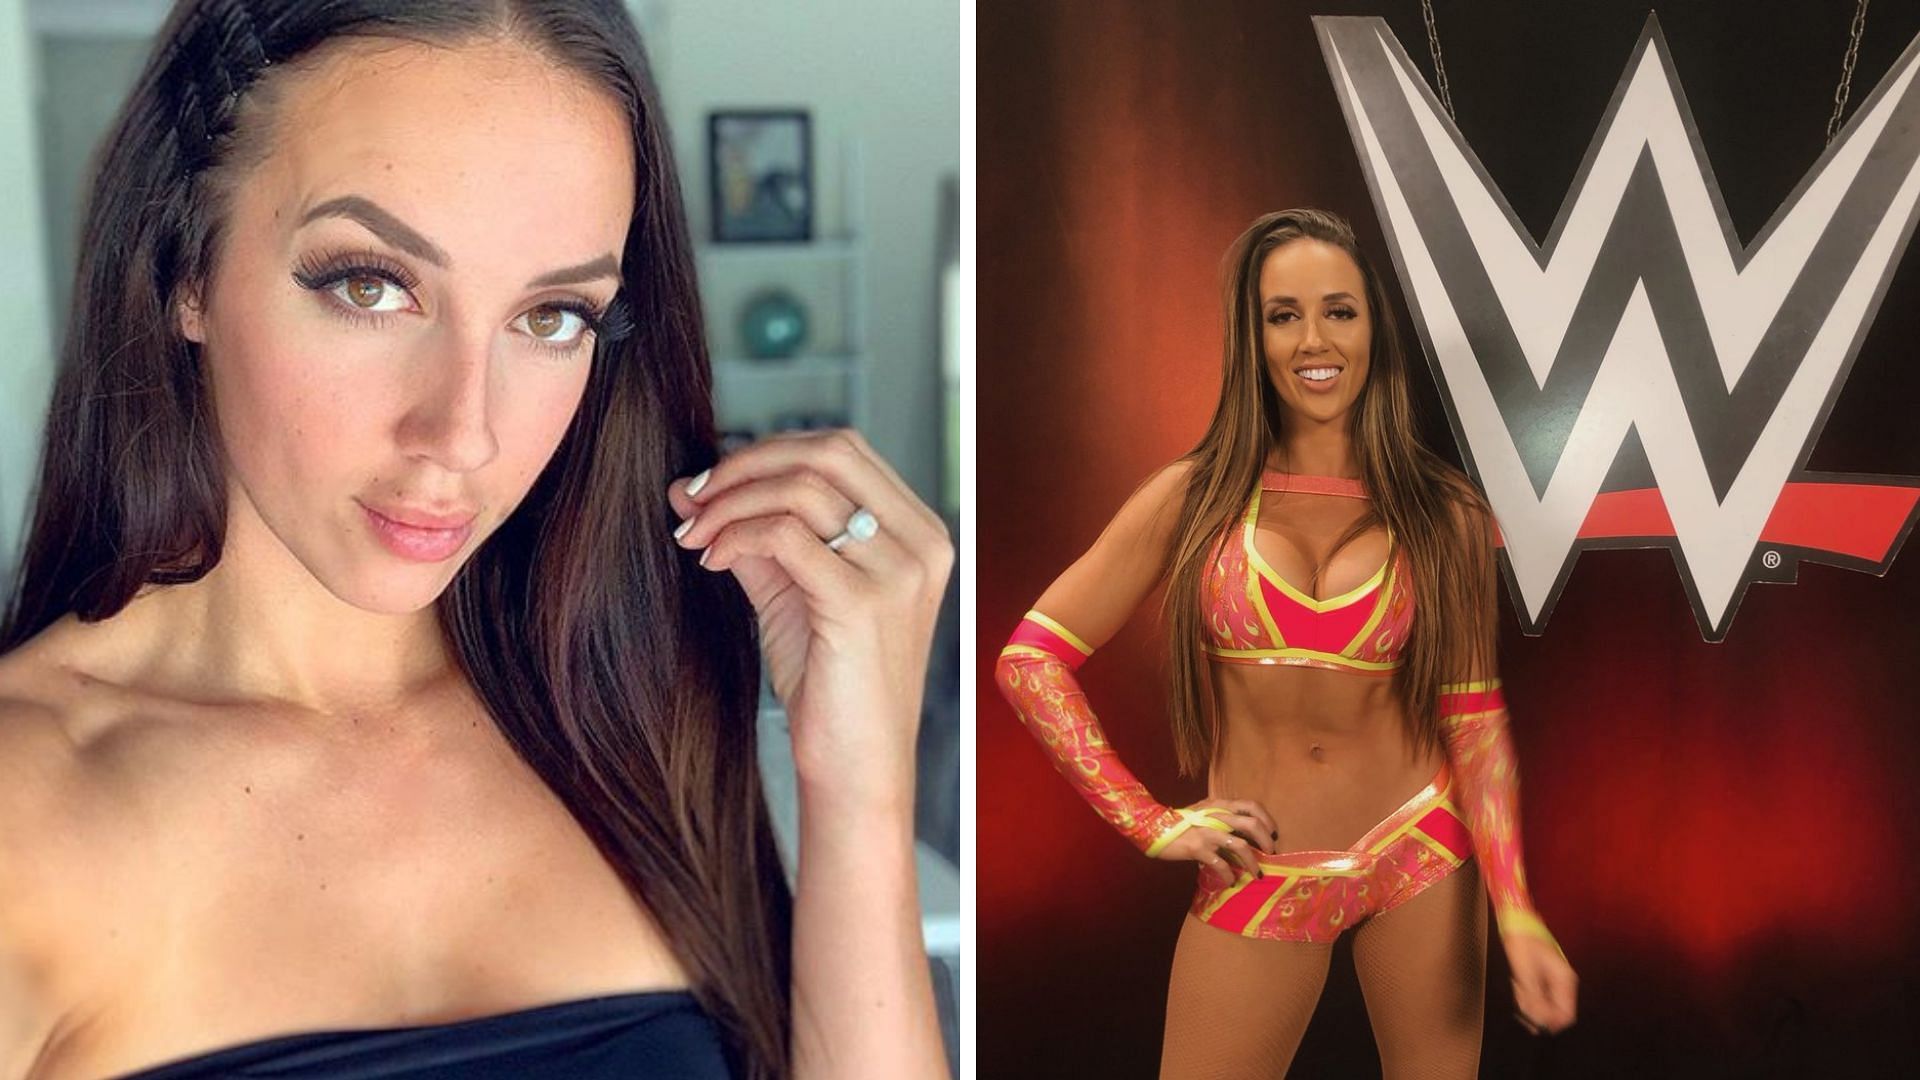 Chelsea Green spent several years in WWE